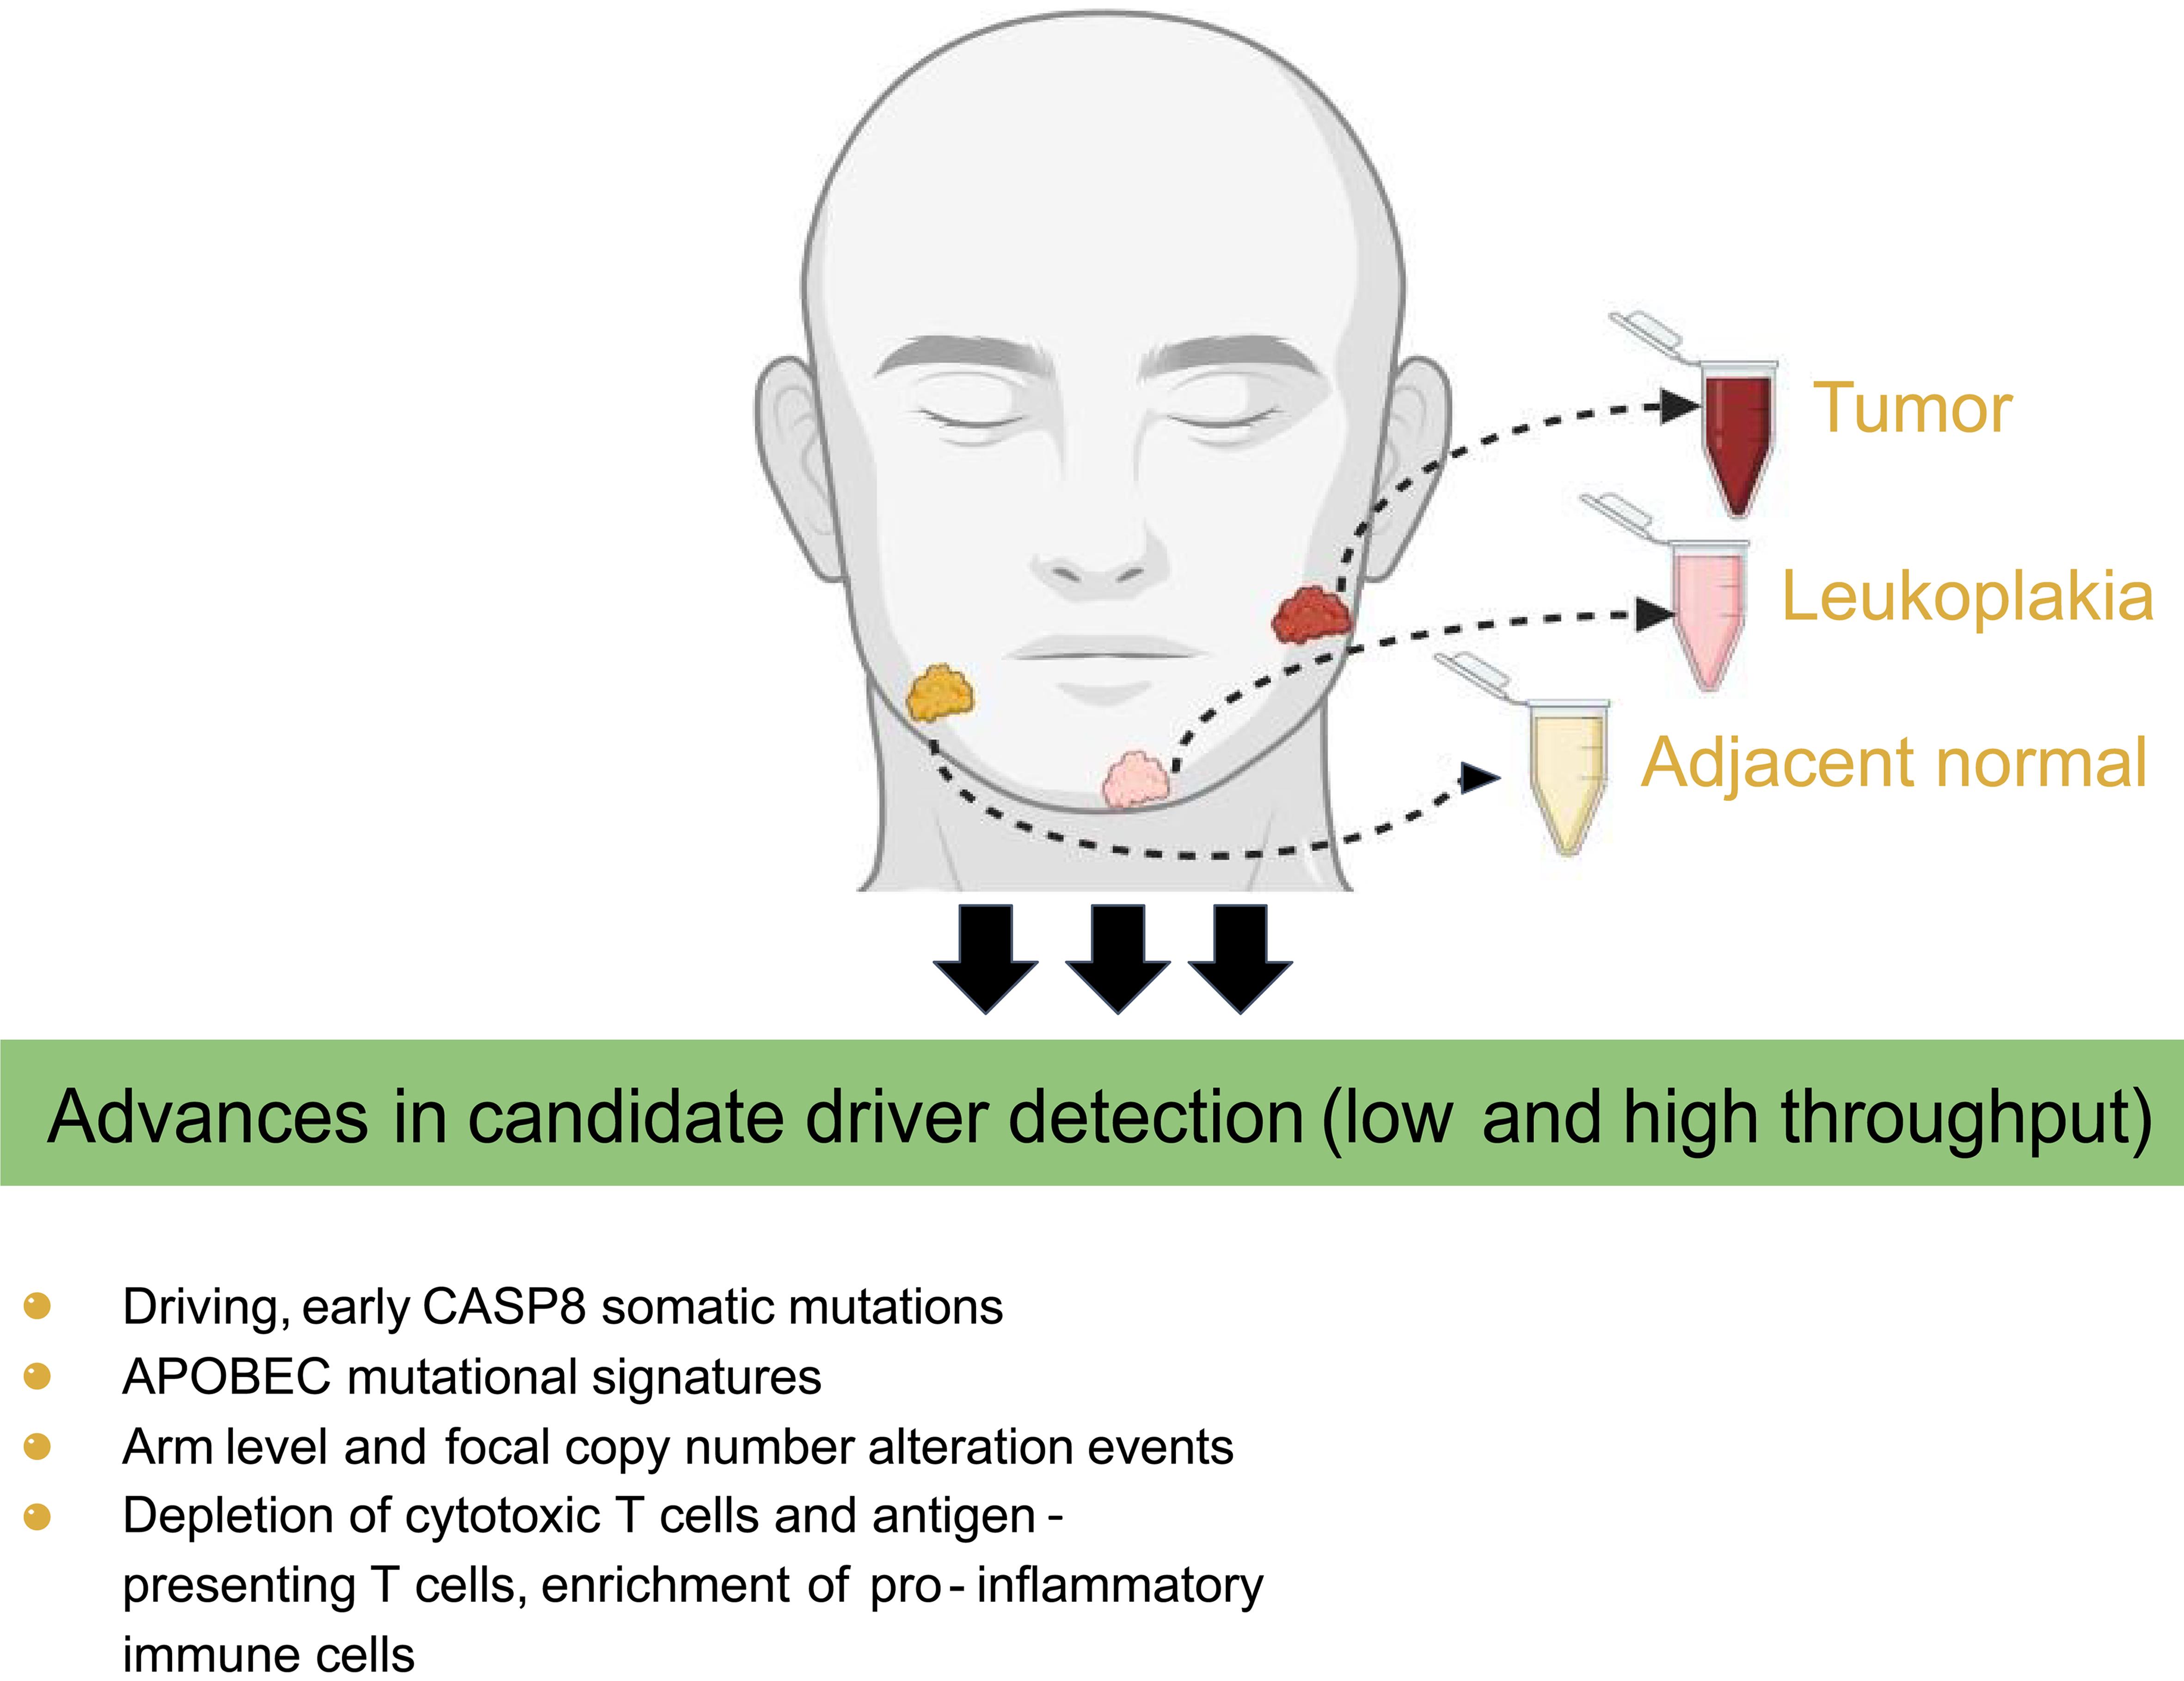 Molecular driving factors behind tumor progression in patients with presence of both leukoplakia and frank tumors in their oral cavity.